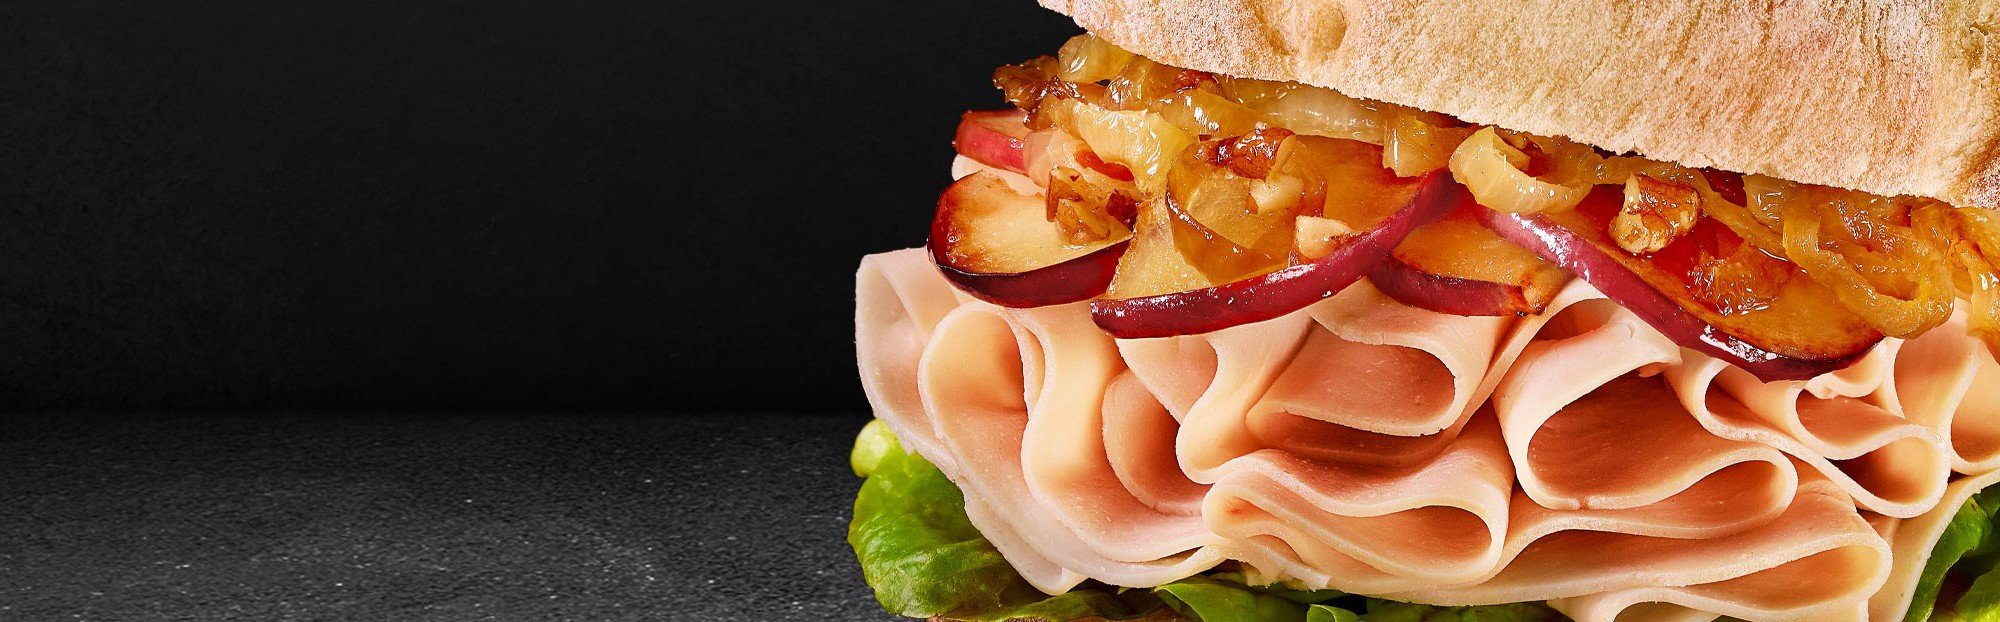 Deli meats without artificial preservatives